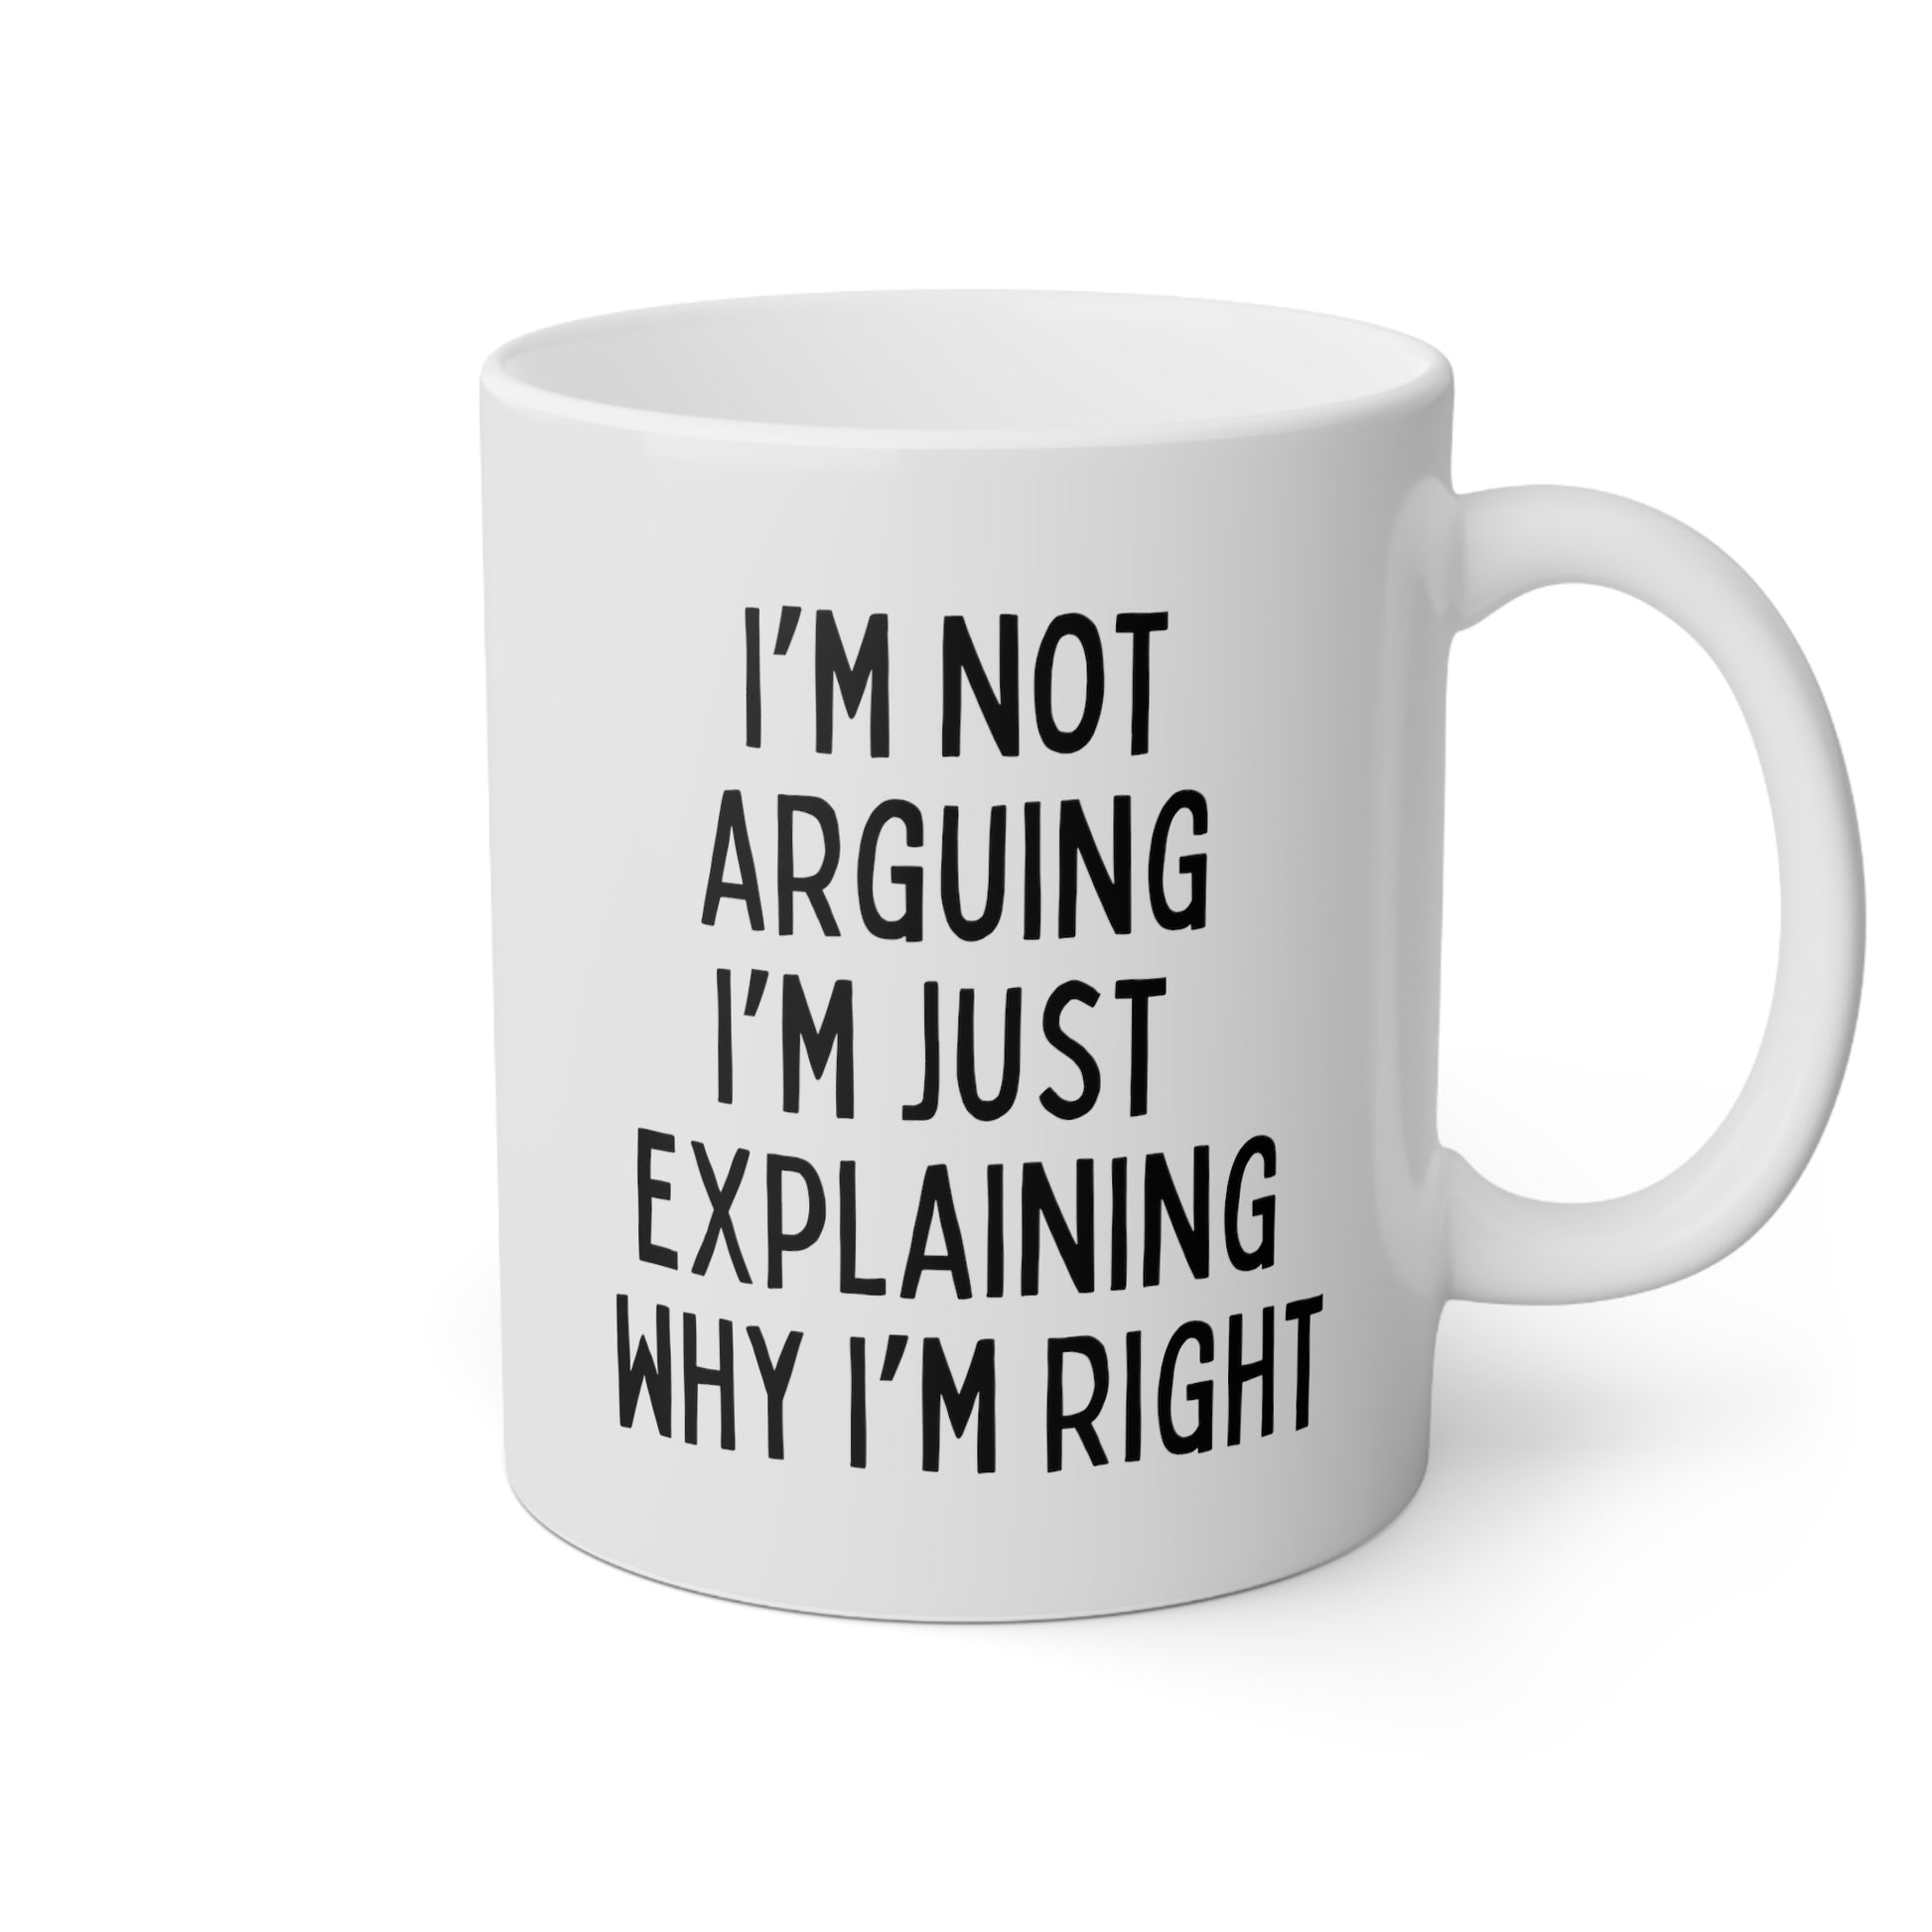 I'm Not Arguing I'm Just Explaining Why I'm Right 11oz white funny large coffee mug gift for birthday christmas sarcastic sassy snarky tea cup waveywares wavey wares wavywares wavy wares